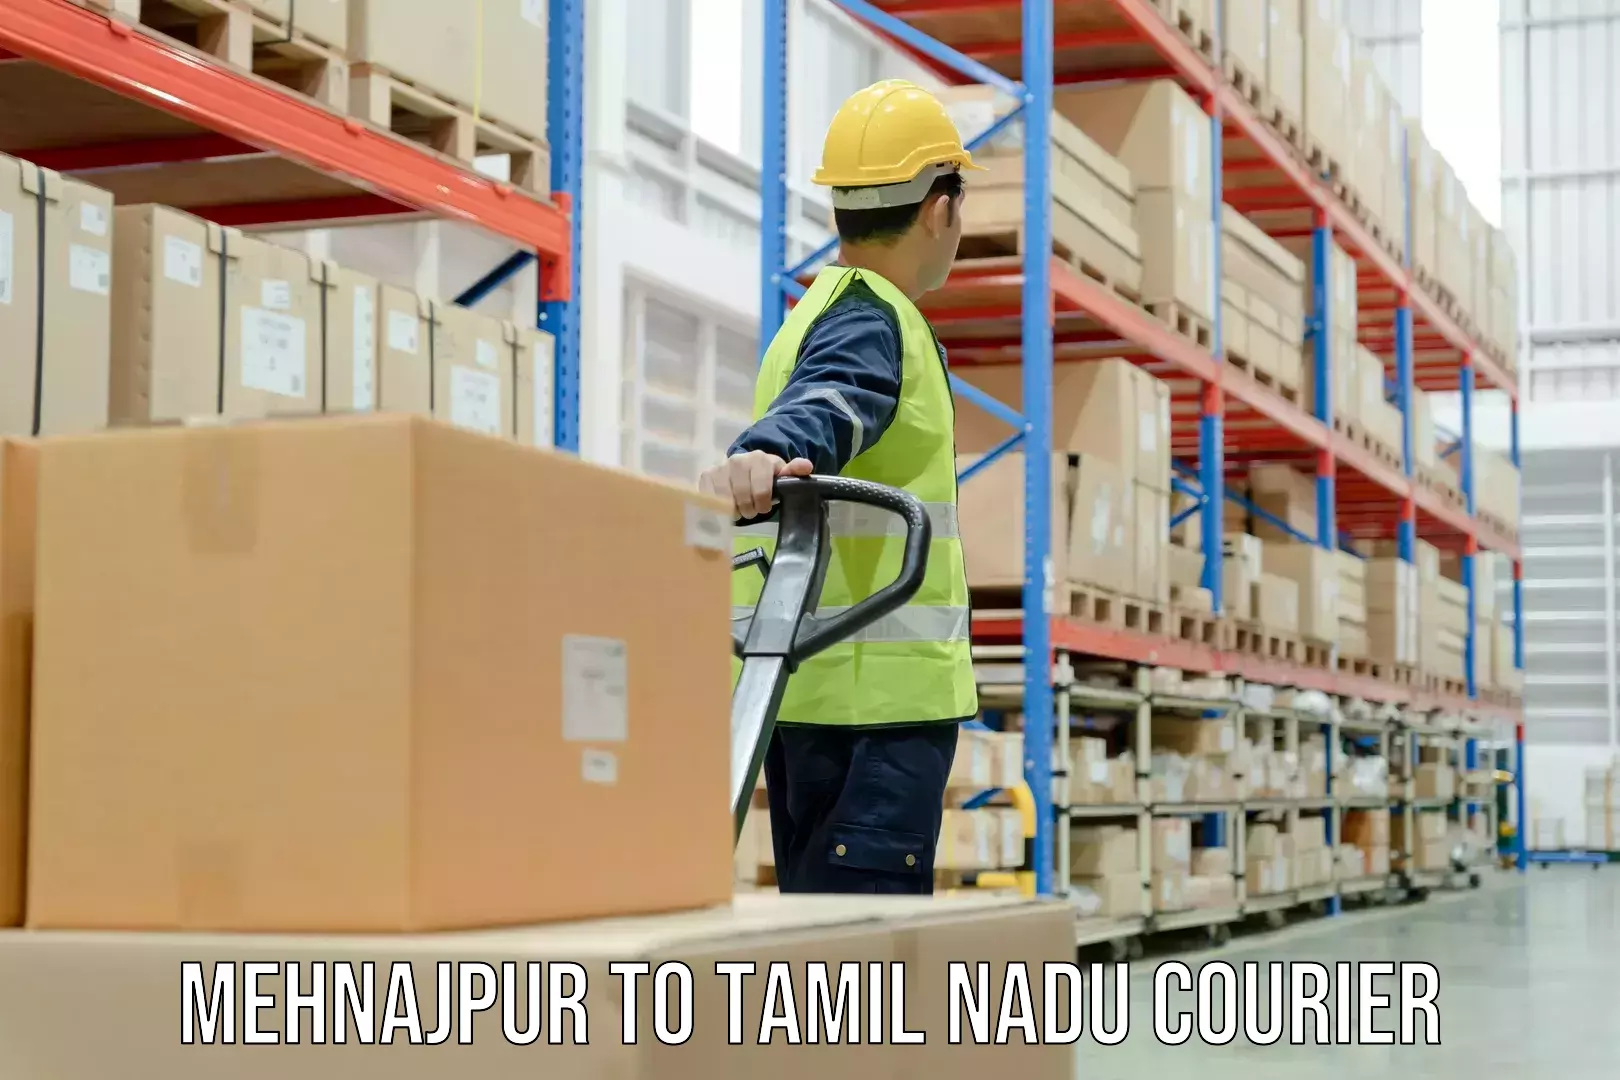 Cost-effective courier solutions Mehnajpur to Tamil Nadu Veterinary and Animal Sciences University Chennai